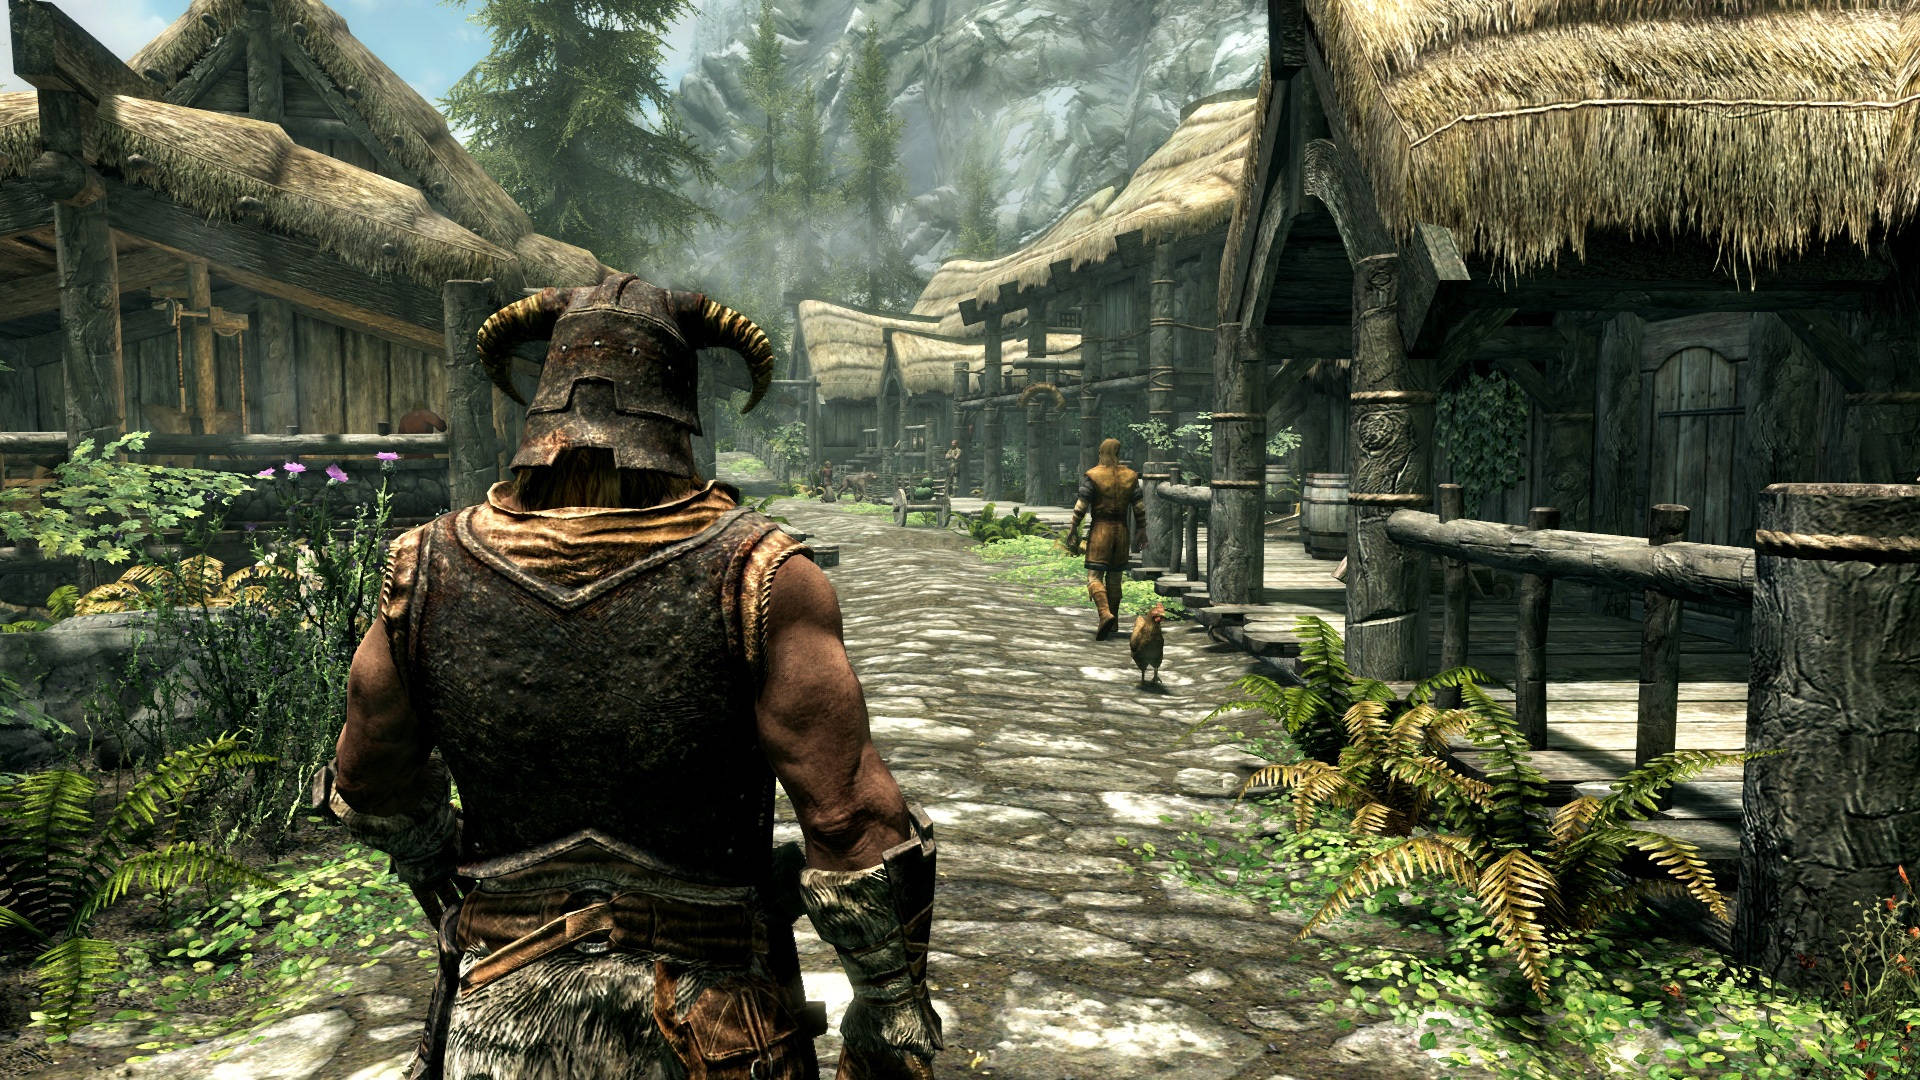 Explore the world of Skyrim from your mobile phone Wallpaper